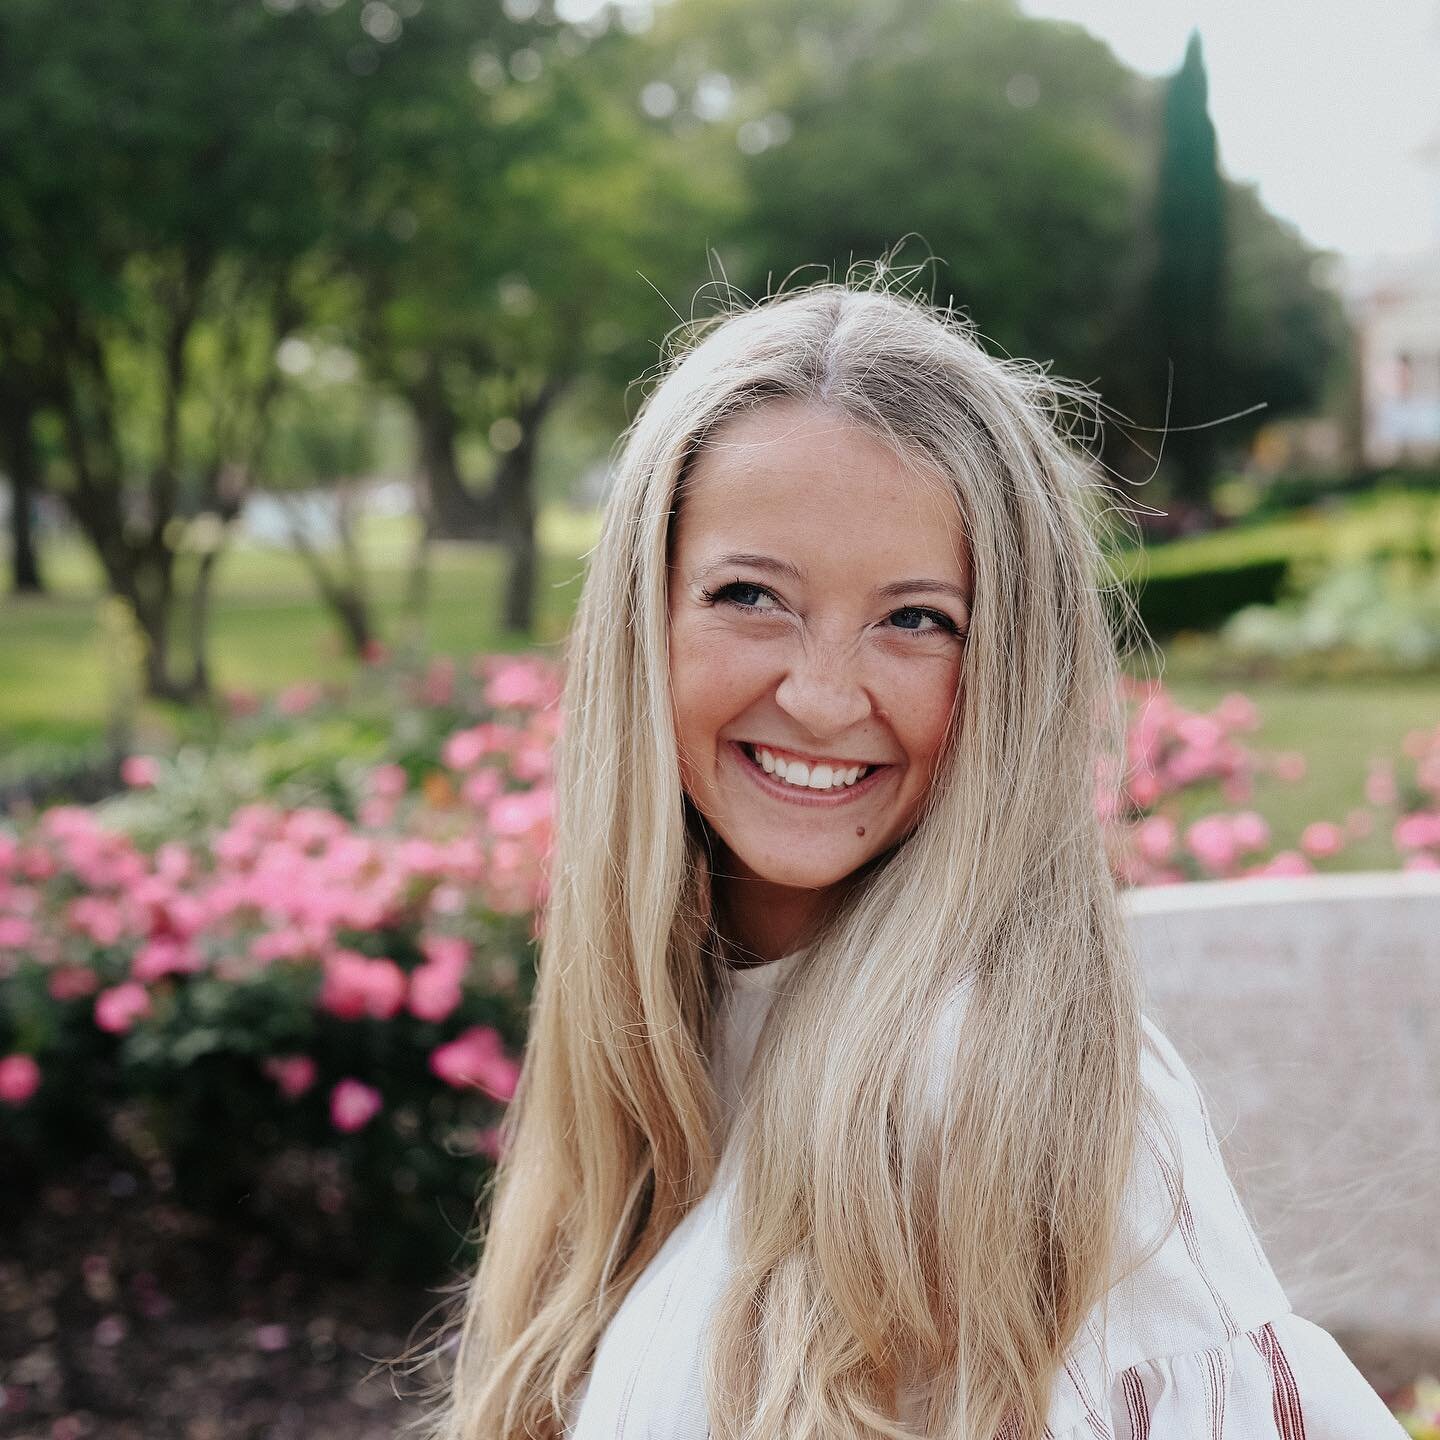 meet Lindsey !!!

Lindsey is a part of the Lovely team &amp; 
everything she has to say is SOLID GOLD👏🏻 

Lindsey walks in an intimacy with God that is so beautiful, grace-filled, and abounding with love. Everything she does is intentional, seasone